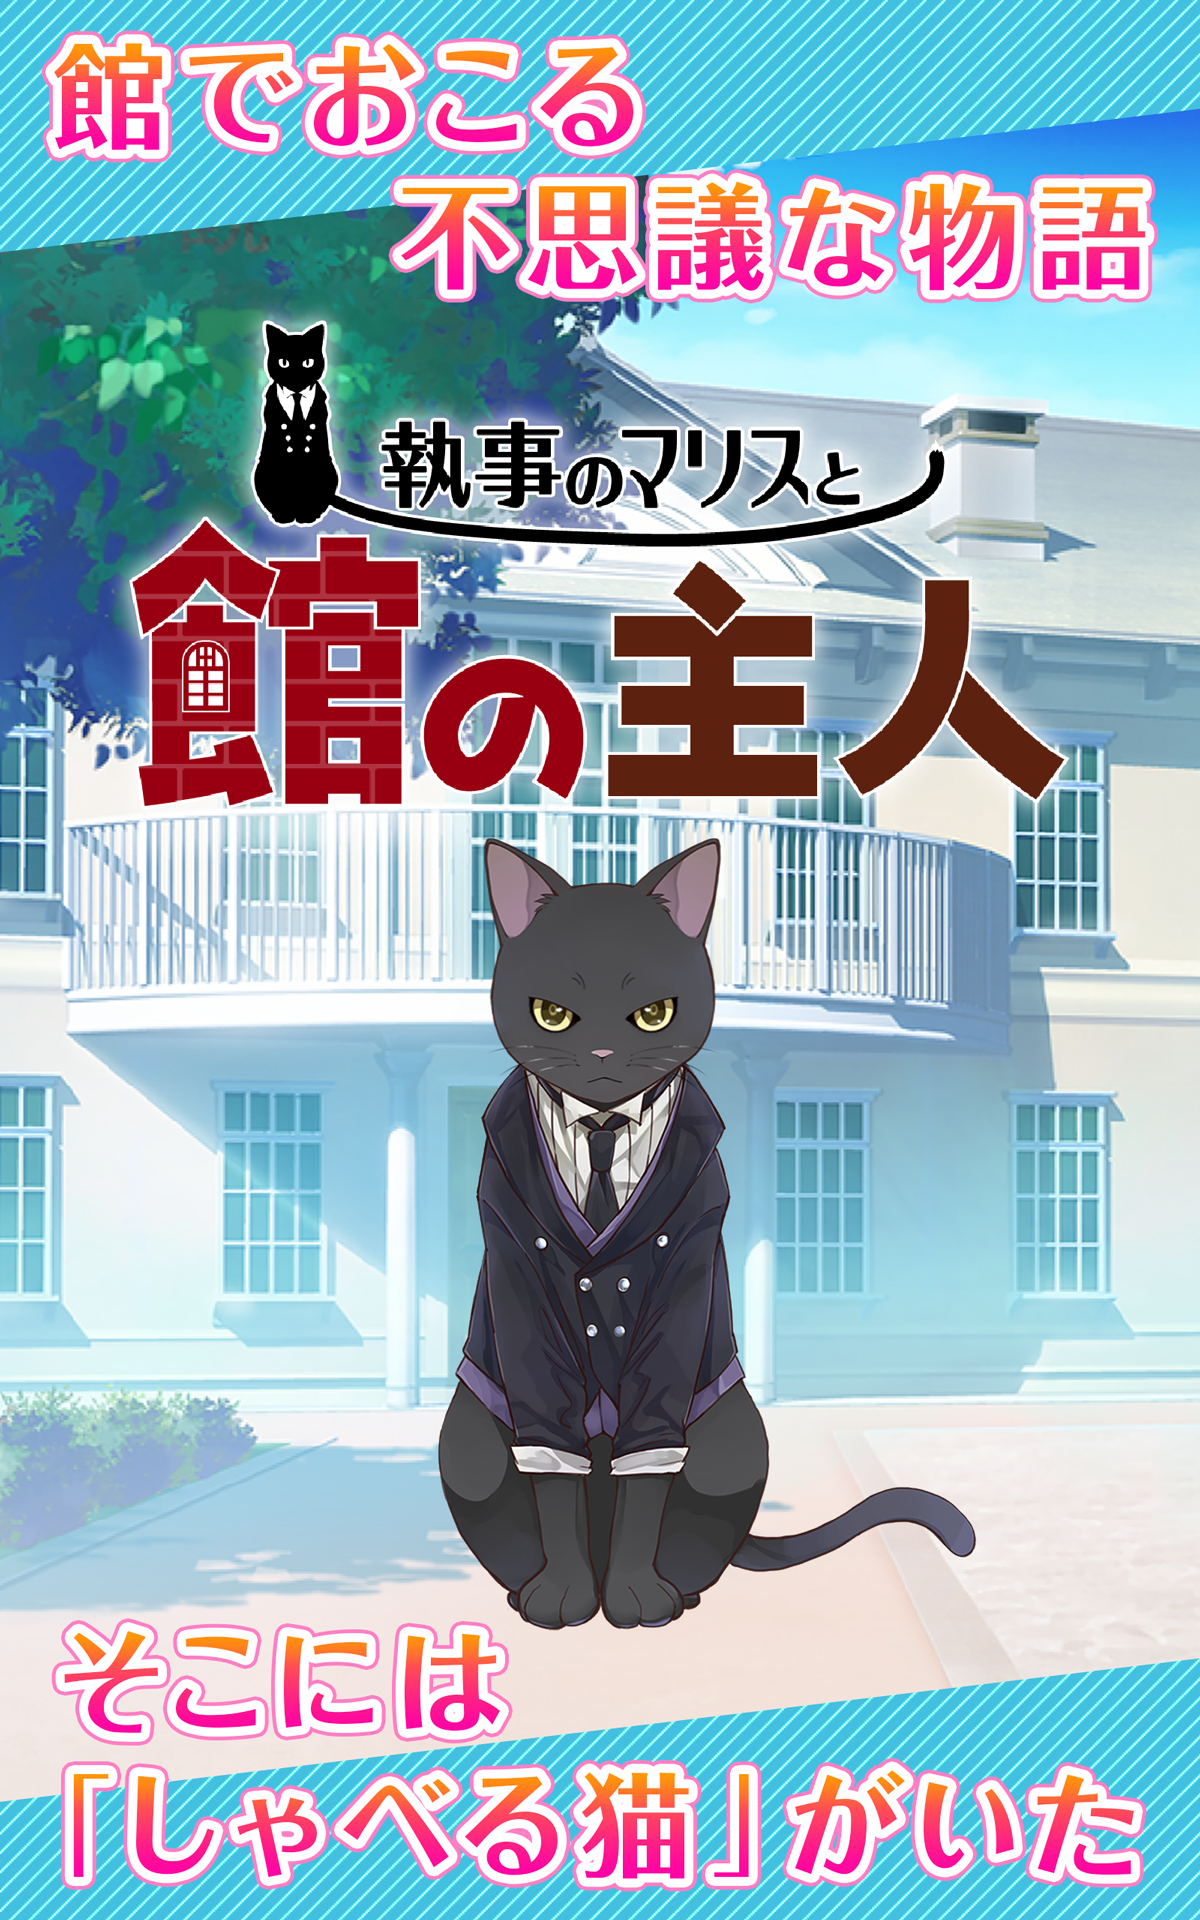 Screenshot 1 of Quản gia mèo nuôi một hầu gái - A Riddle Cat Game - Maris the Butler and the Owner of the Mansion 1.0.5